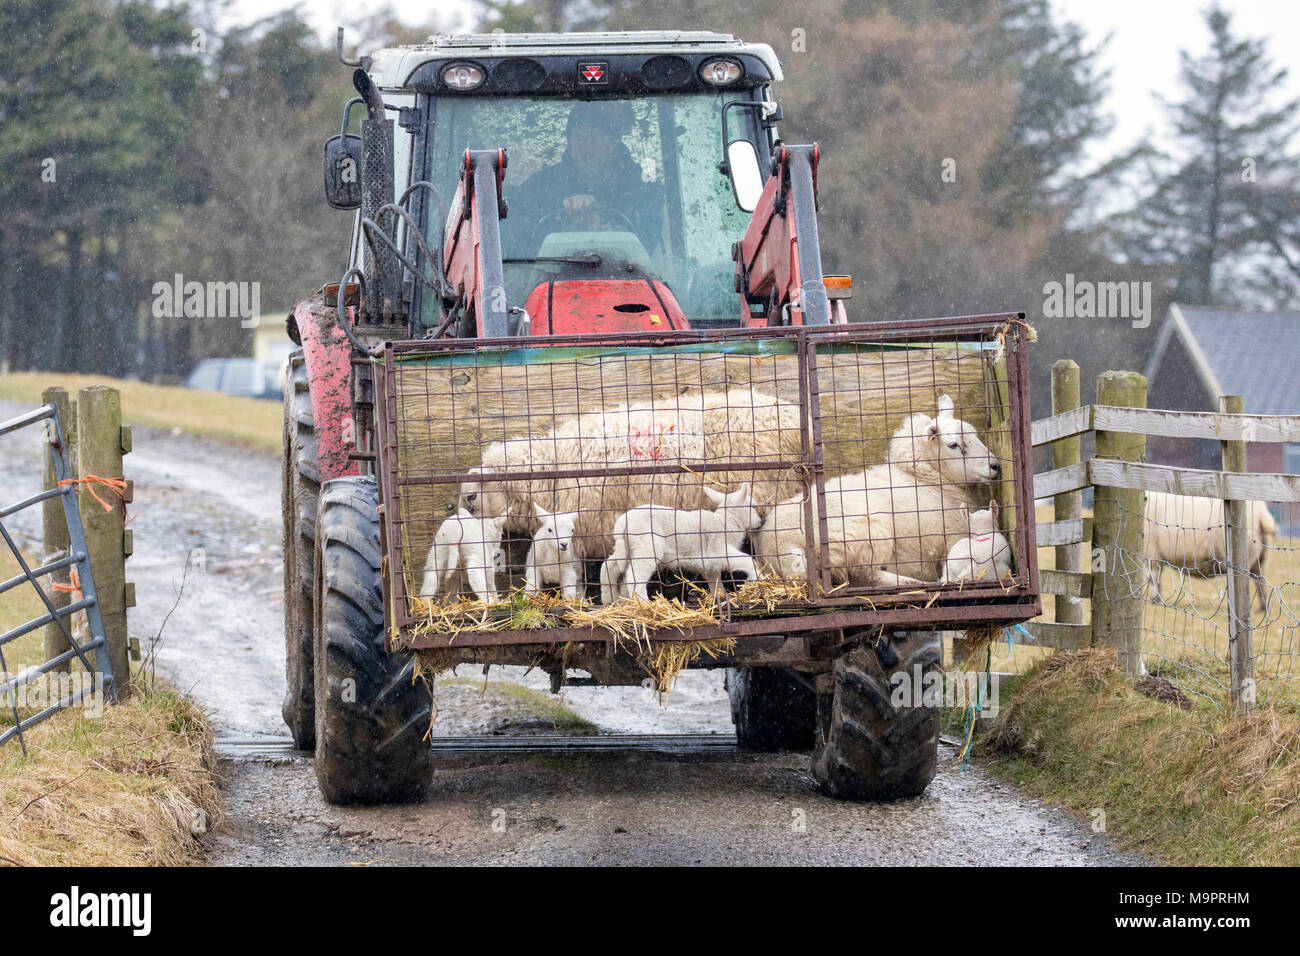 North Wales, UK 28th March 2018, UK Weather:  A further spell of snowfall and colder temperatures hits North Wales with further snow expected in the coming week. A farmer moving sheep as the snow begins on an upland sheep farm near to the town of Denbigh, North Wales  © DGDImages/Alamy Live News Stock Photo